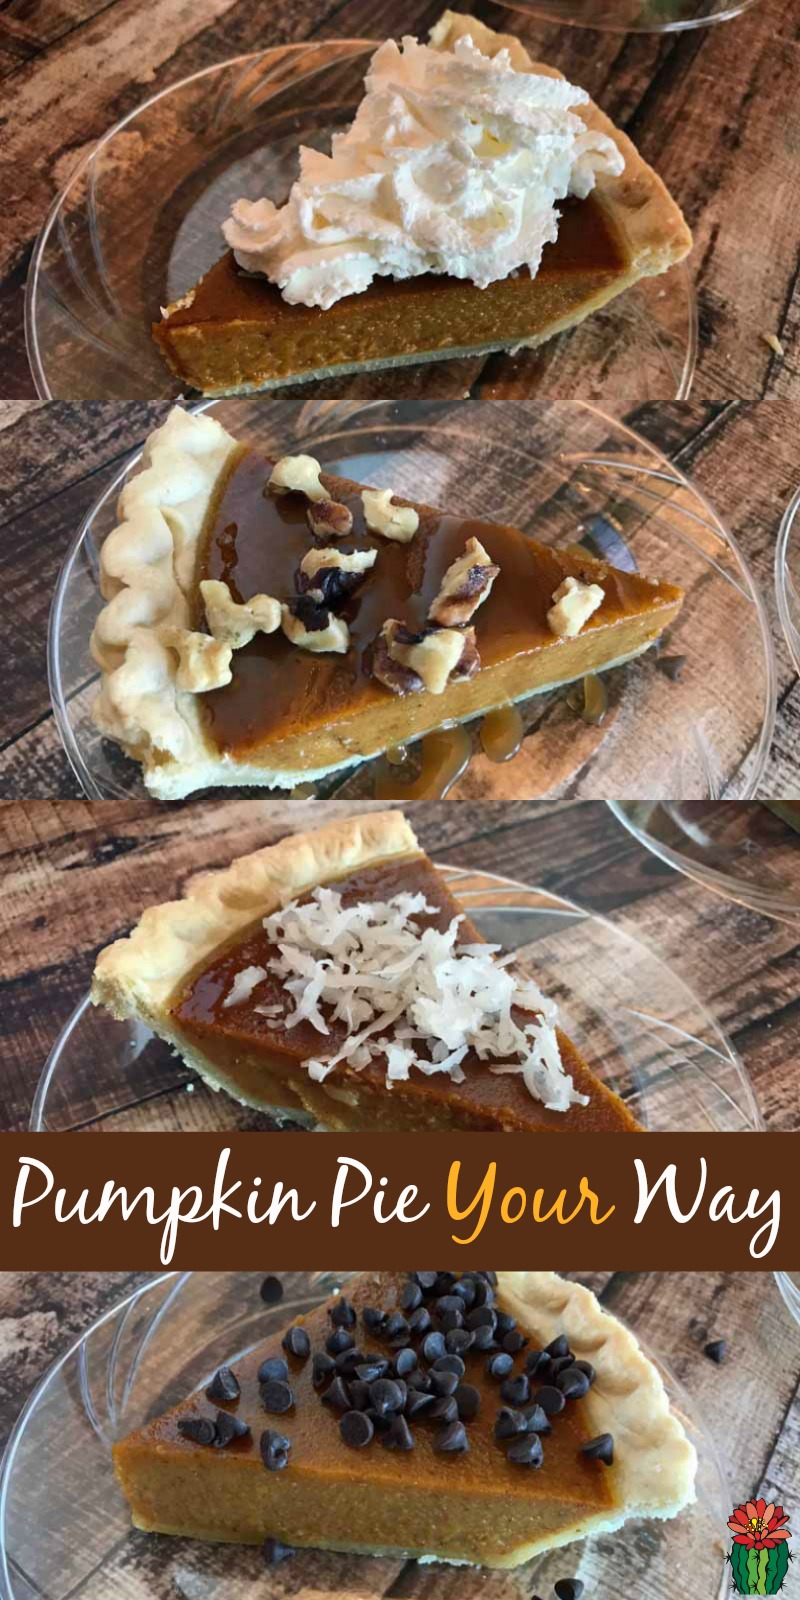 Ready to serve an extra special fall dessert idea with minimal effort? Make a pumpkin pie toppings bar, everyone can eat pie their own way.